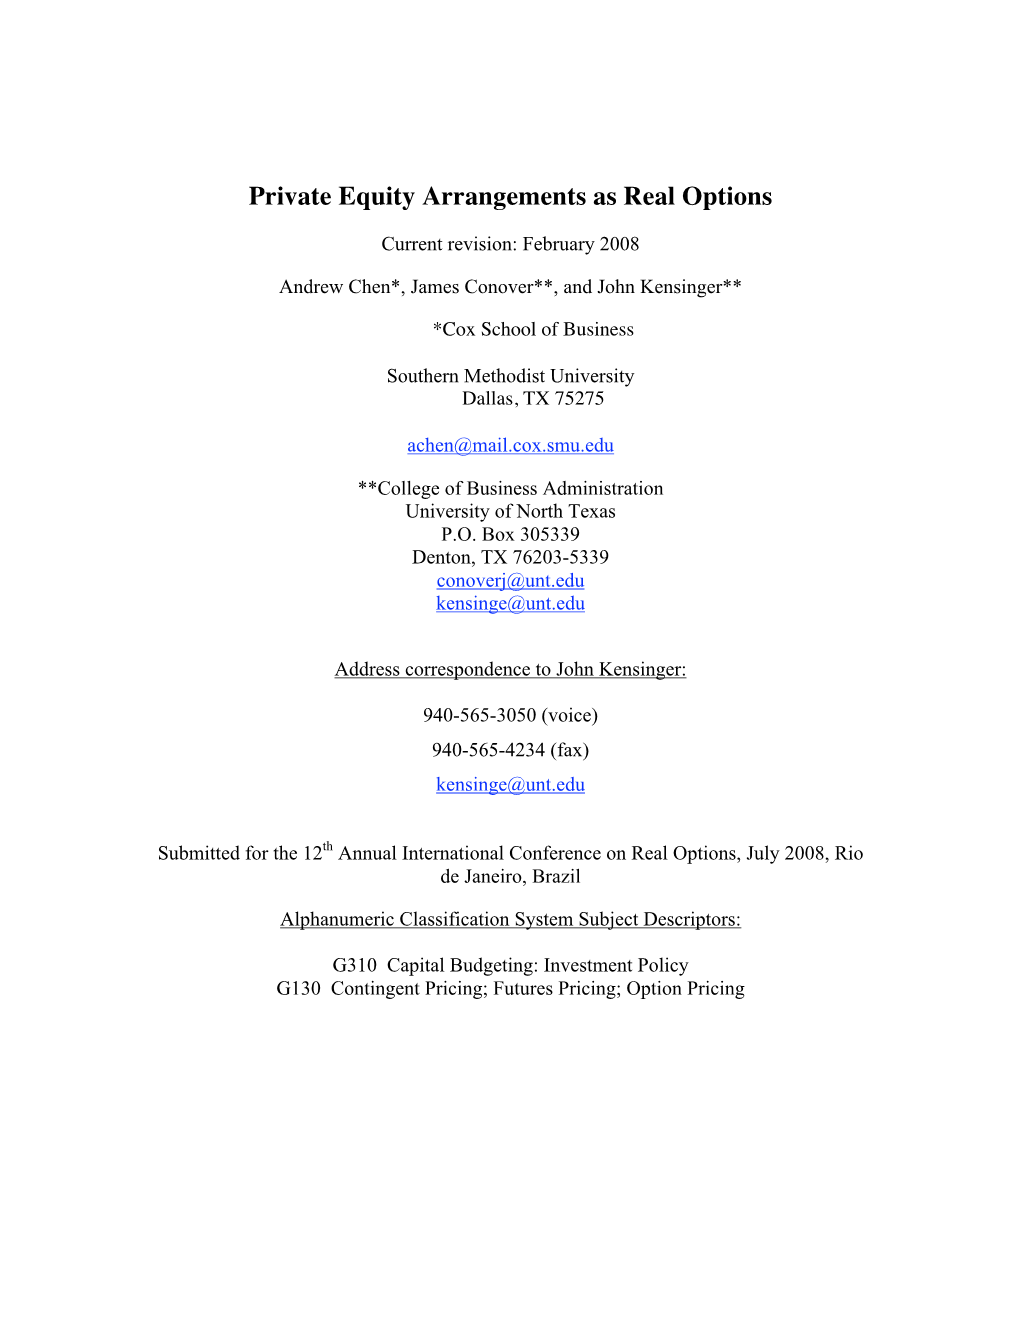 Private Equity Arrangements As Real Options